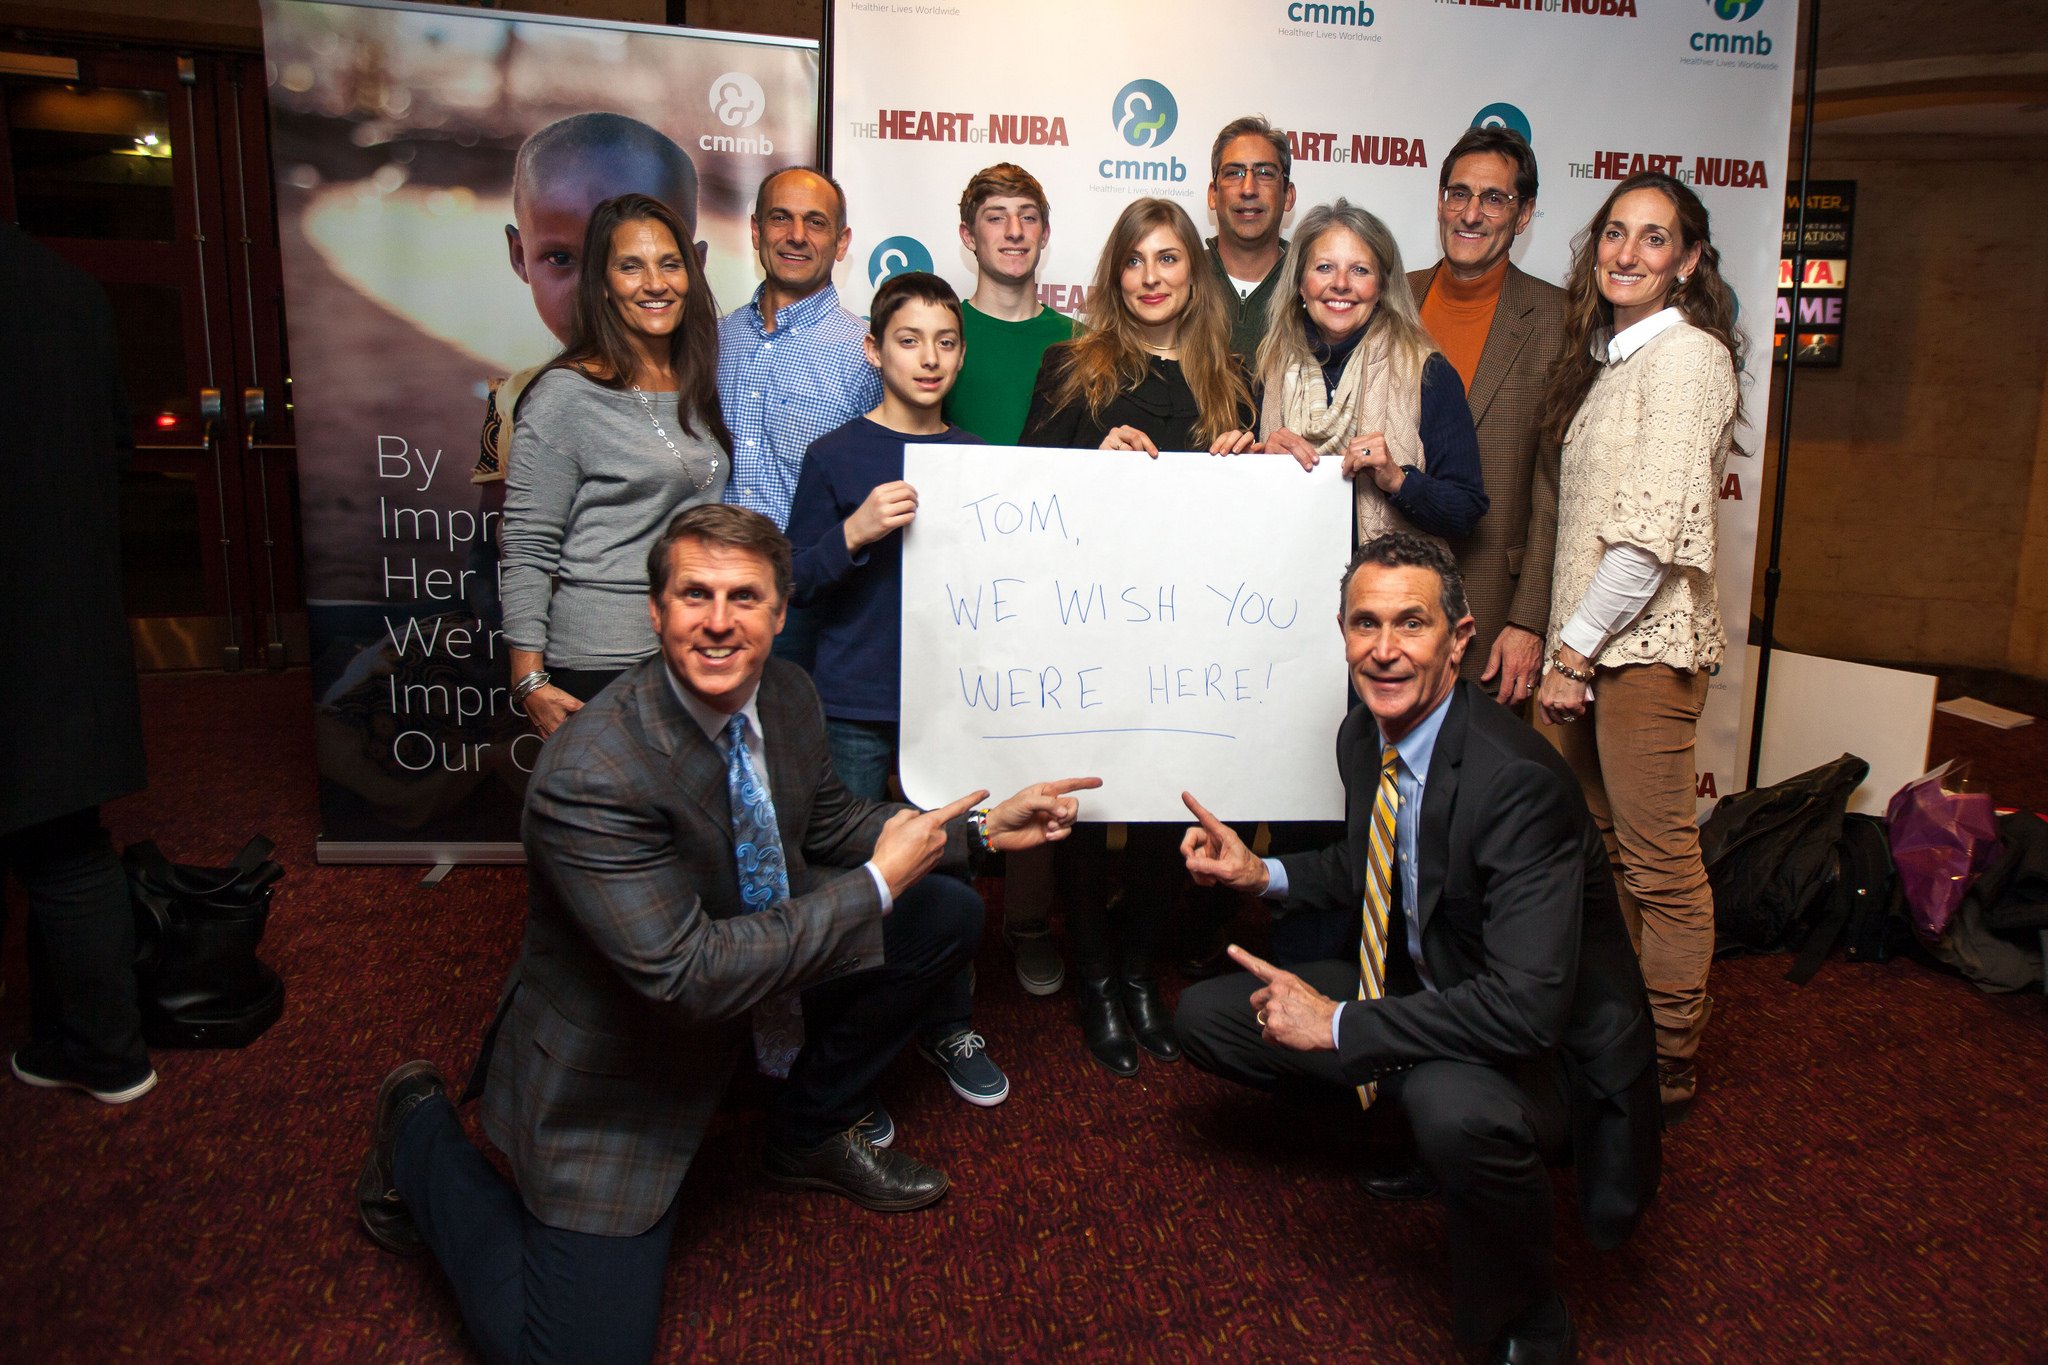 Ken Carlson (bottom left) with many members of Tom Catena's family, and CMMB CEO and president, Bruce Wilkinson (bottom right) at the exclusive premiere of The Heart of Nuba in NYC. 